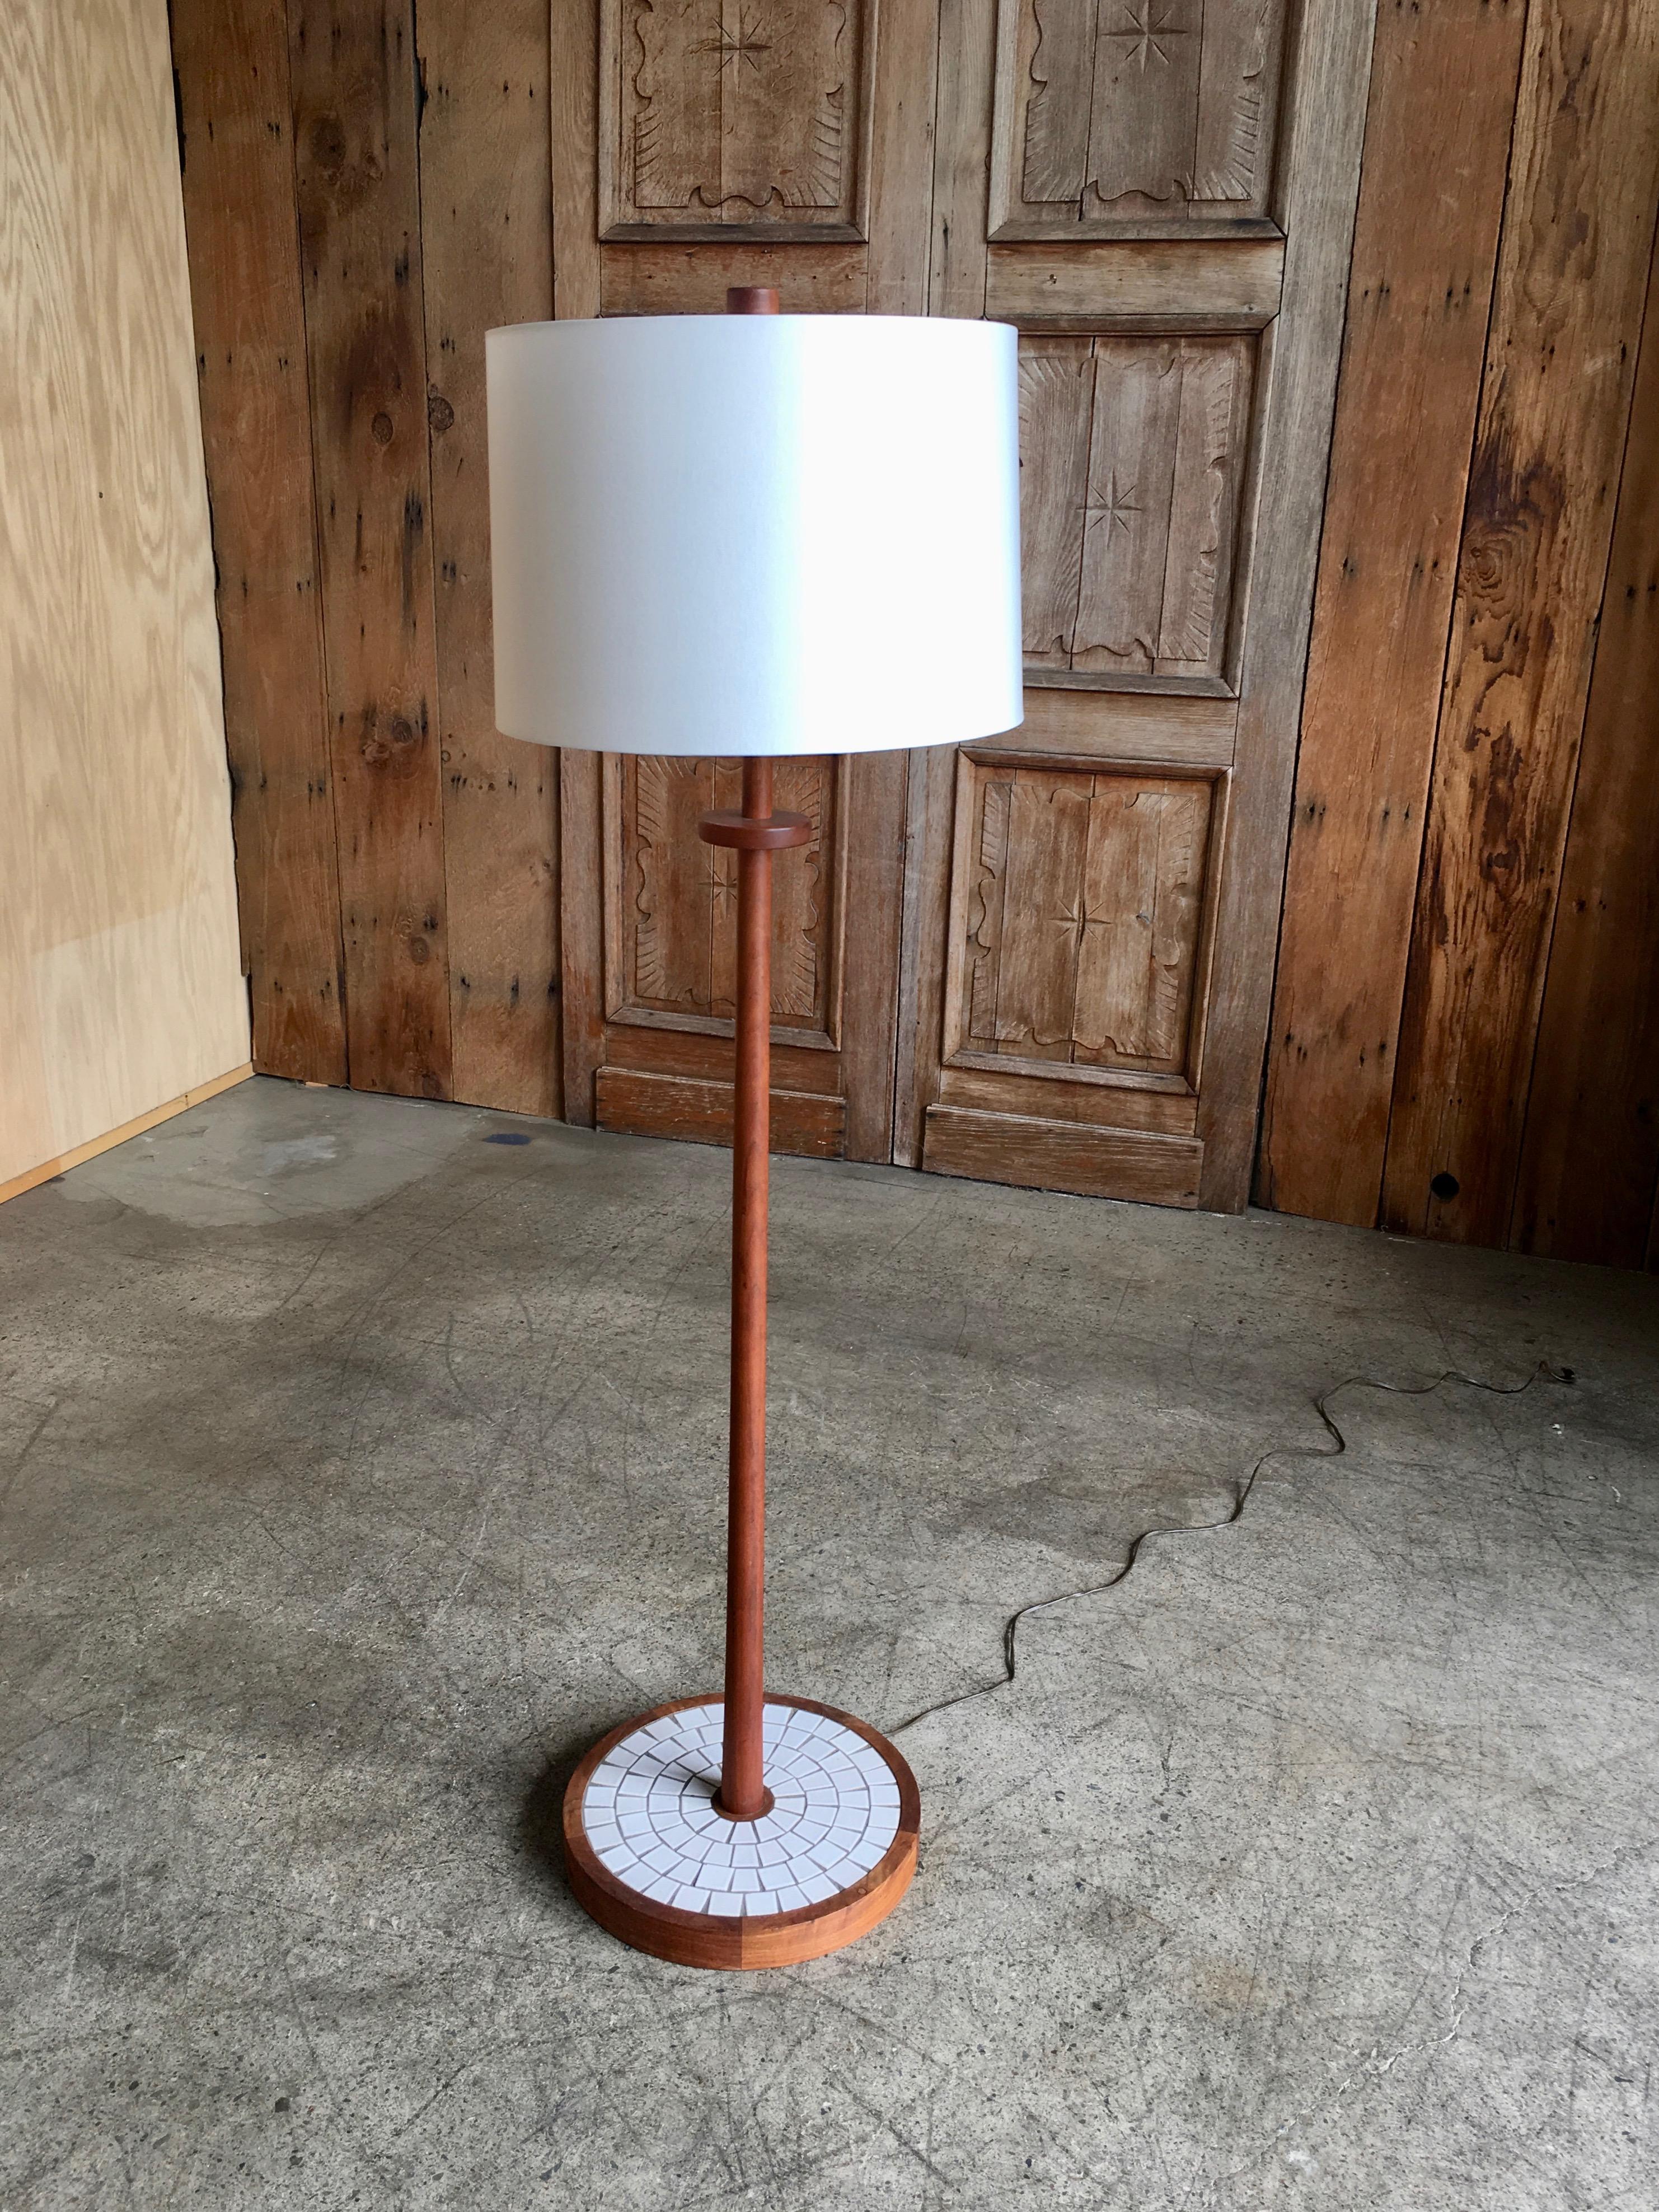 This model W1-28 floor lamp was designed by Gordon & Jane Martz and manufactured at their Marshall Studios. Measures: base is 14 x 14.